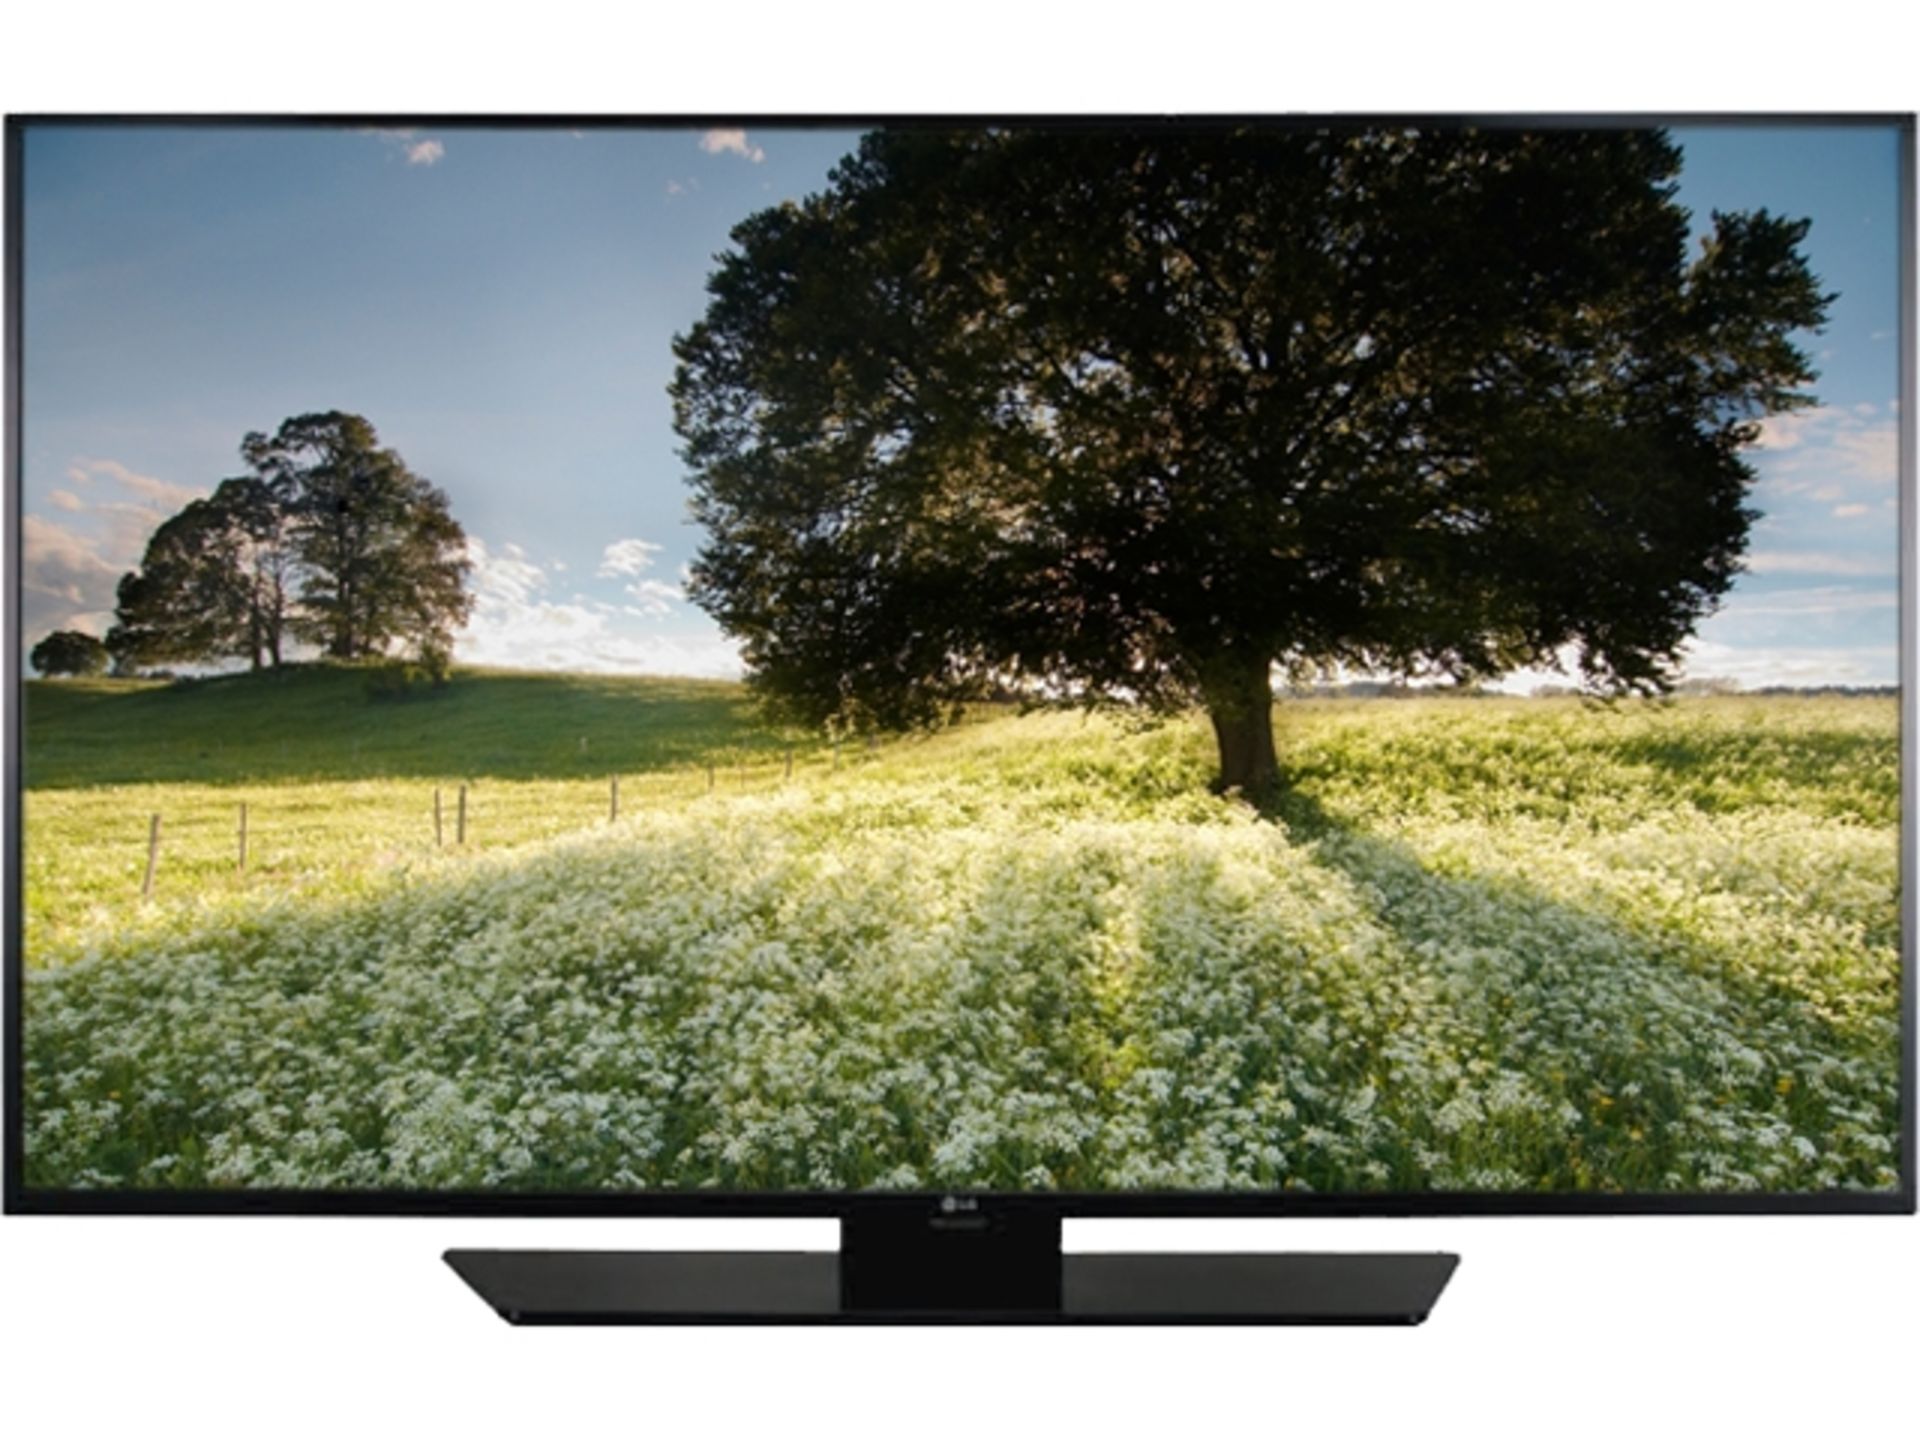 V Grade A 55" FULL HD LED COMMERCIAL TV WITH FREEVIEW 55LX341C (Item Will Be Available Approx 5 Days